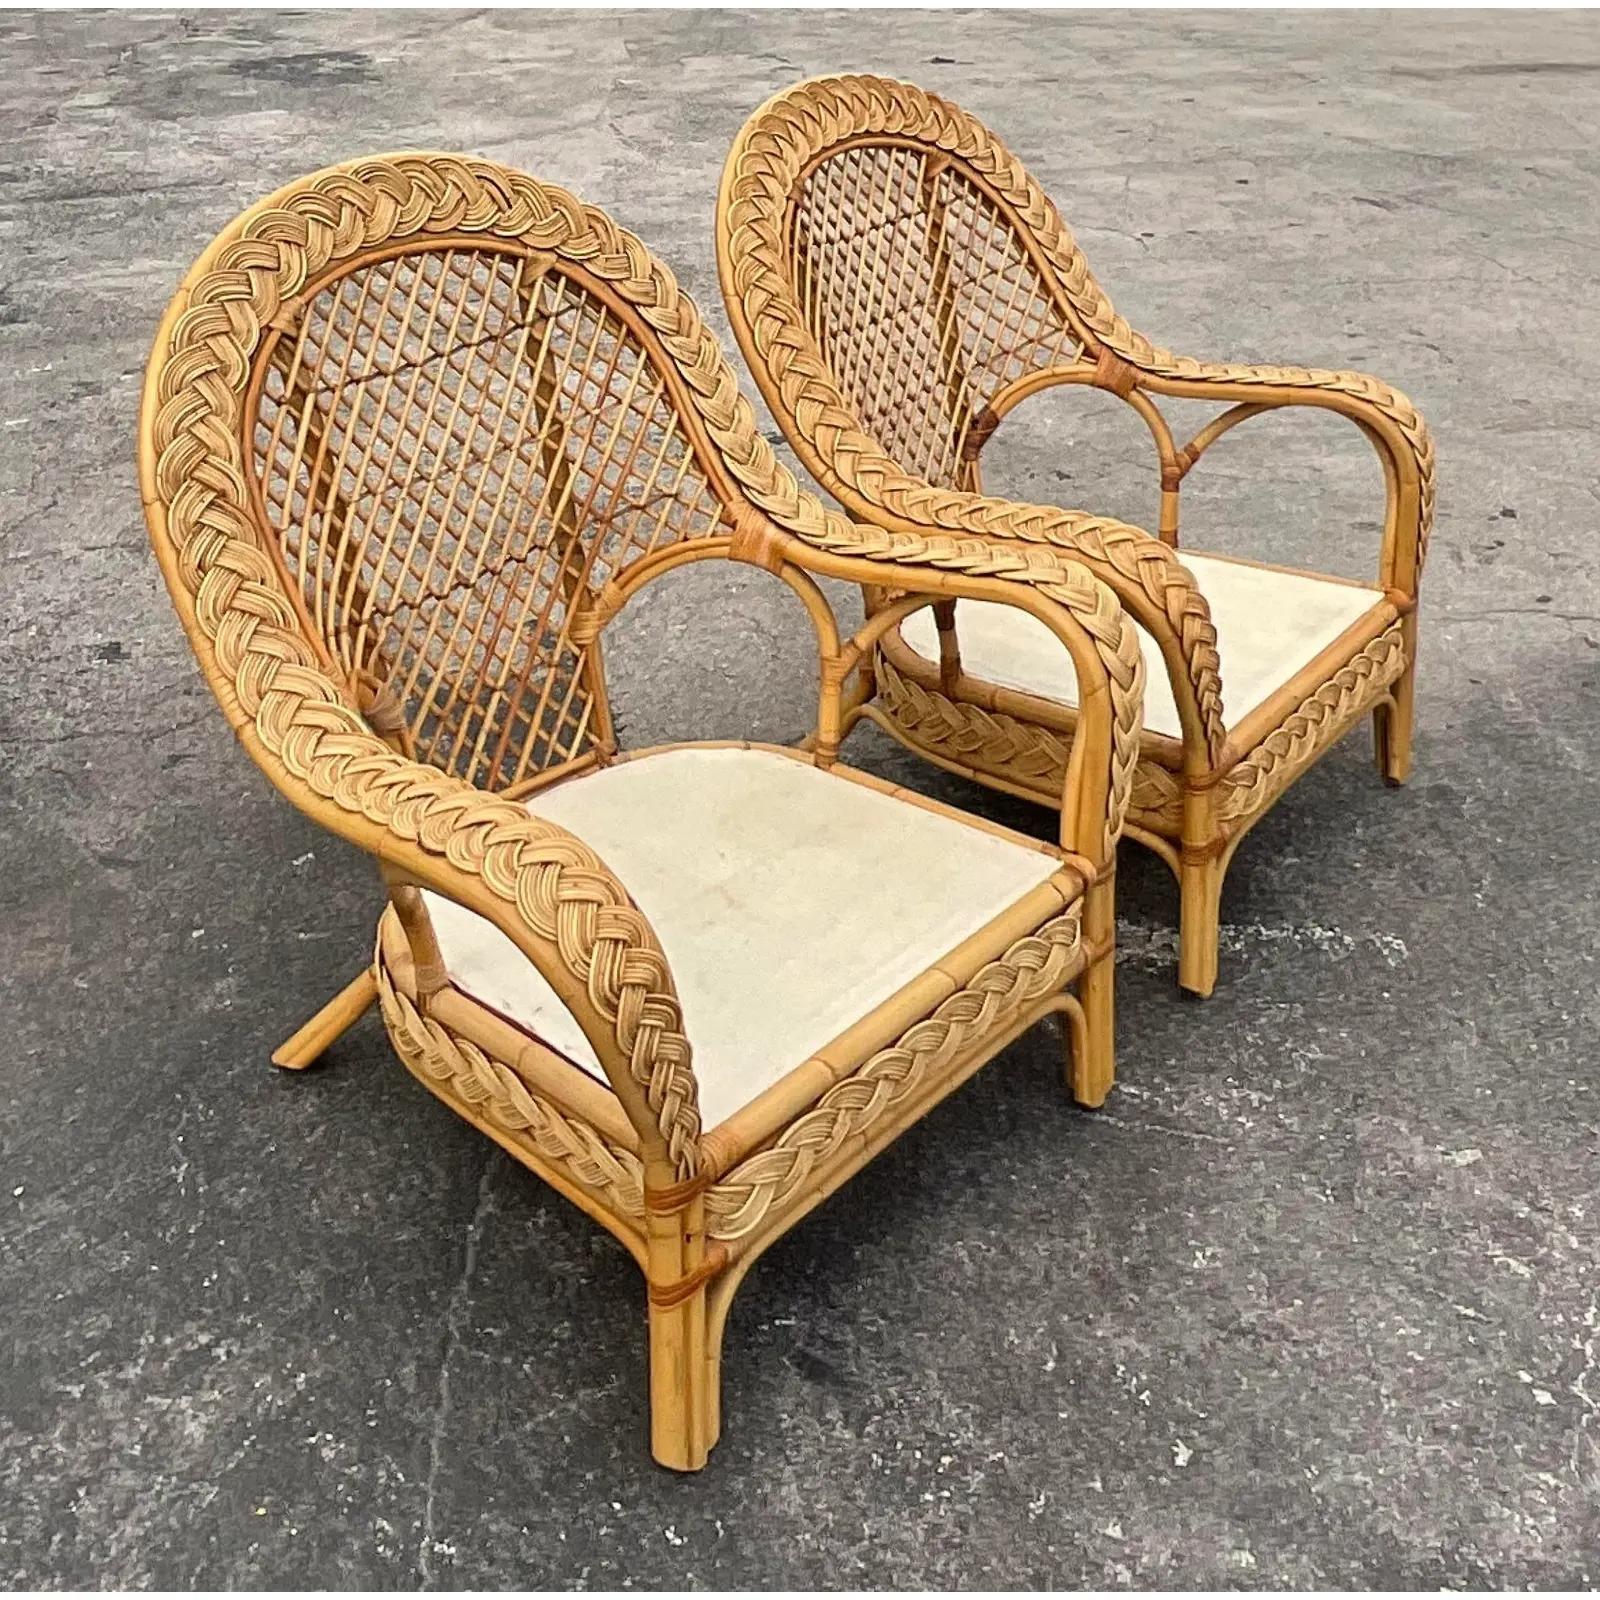 Fabulous pair of vintage Coastal lounge chairs. Gorgeous braided rattan with a high paddle back. Matching sofa and loveseat also available. Acquired from a Palm Beach estate. Cushions included.